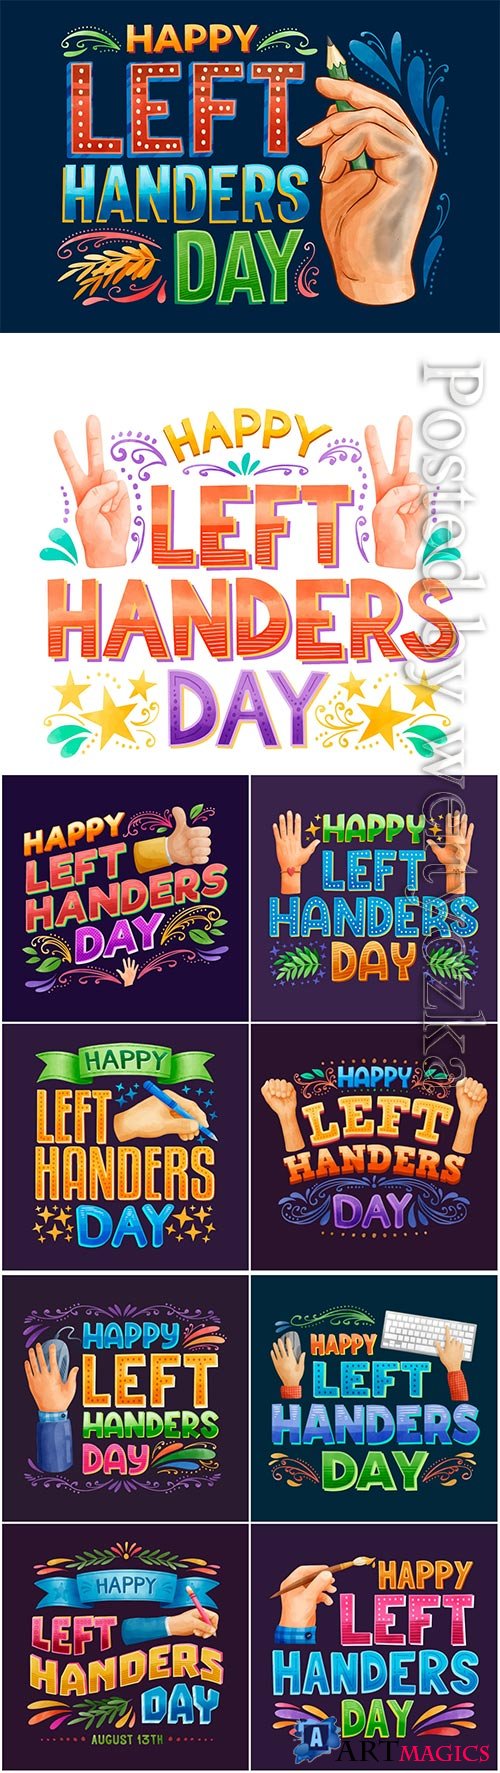 Left handers day lettering vector collection illustration